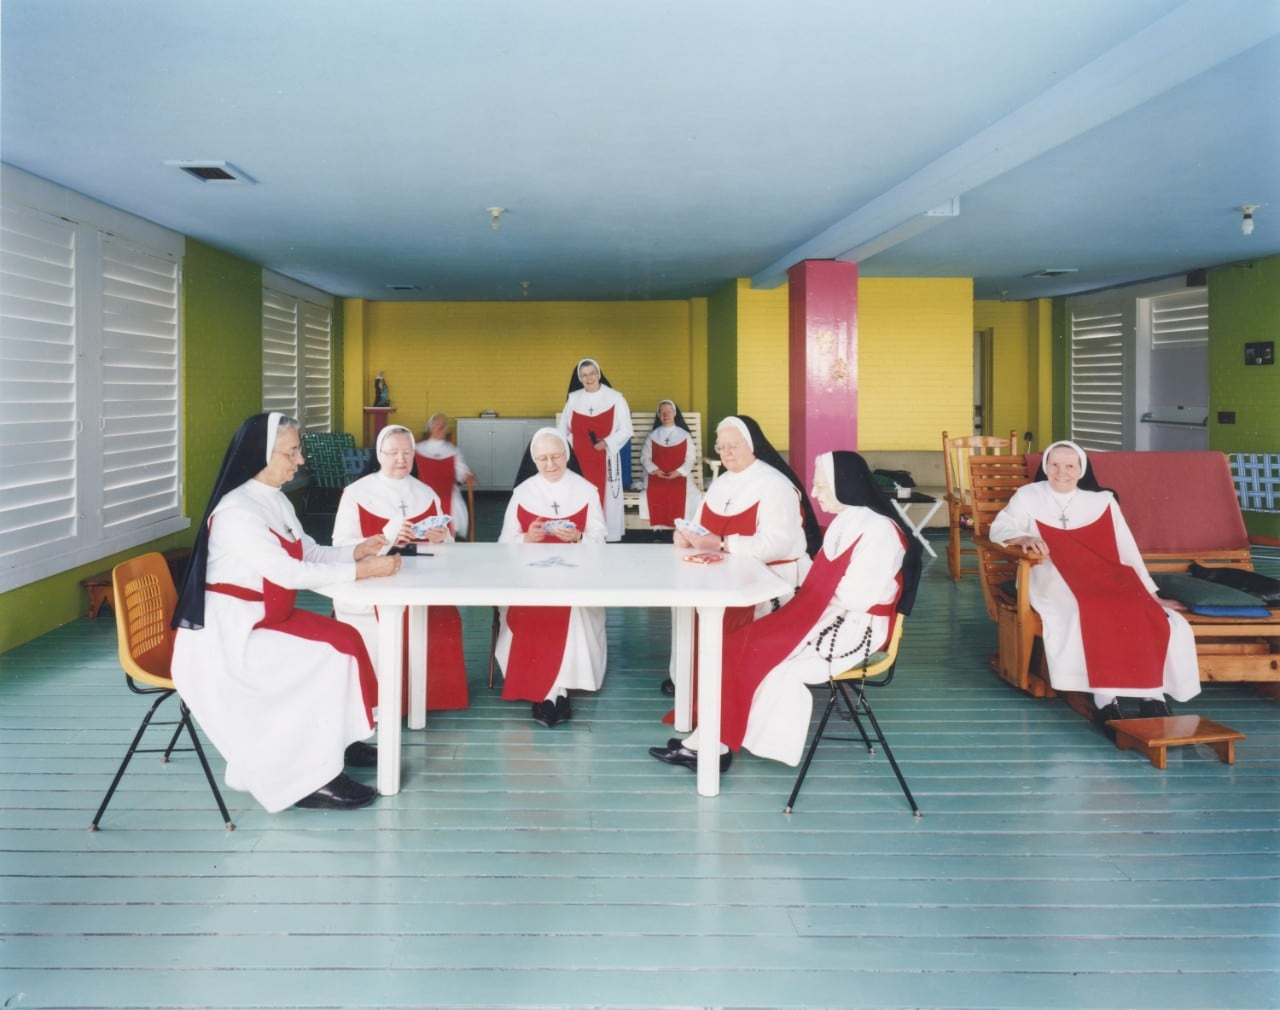 Group of nuns sat in common room